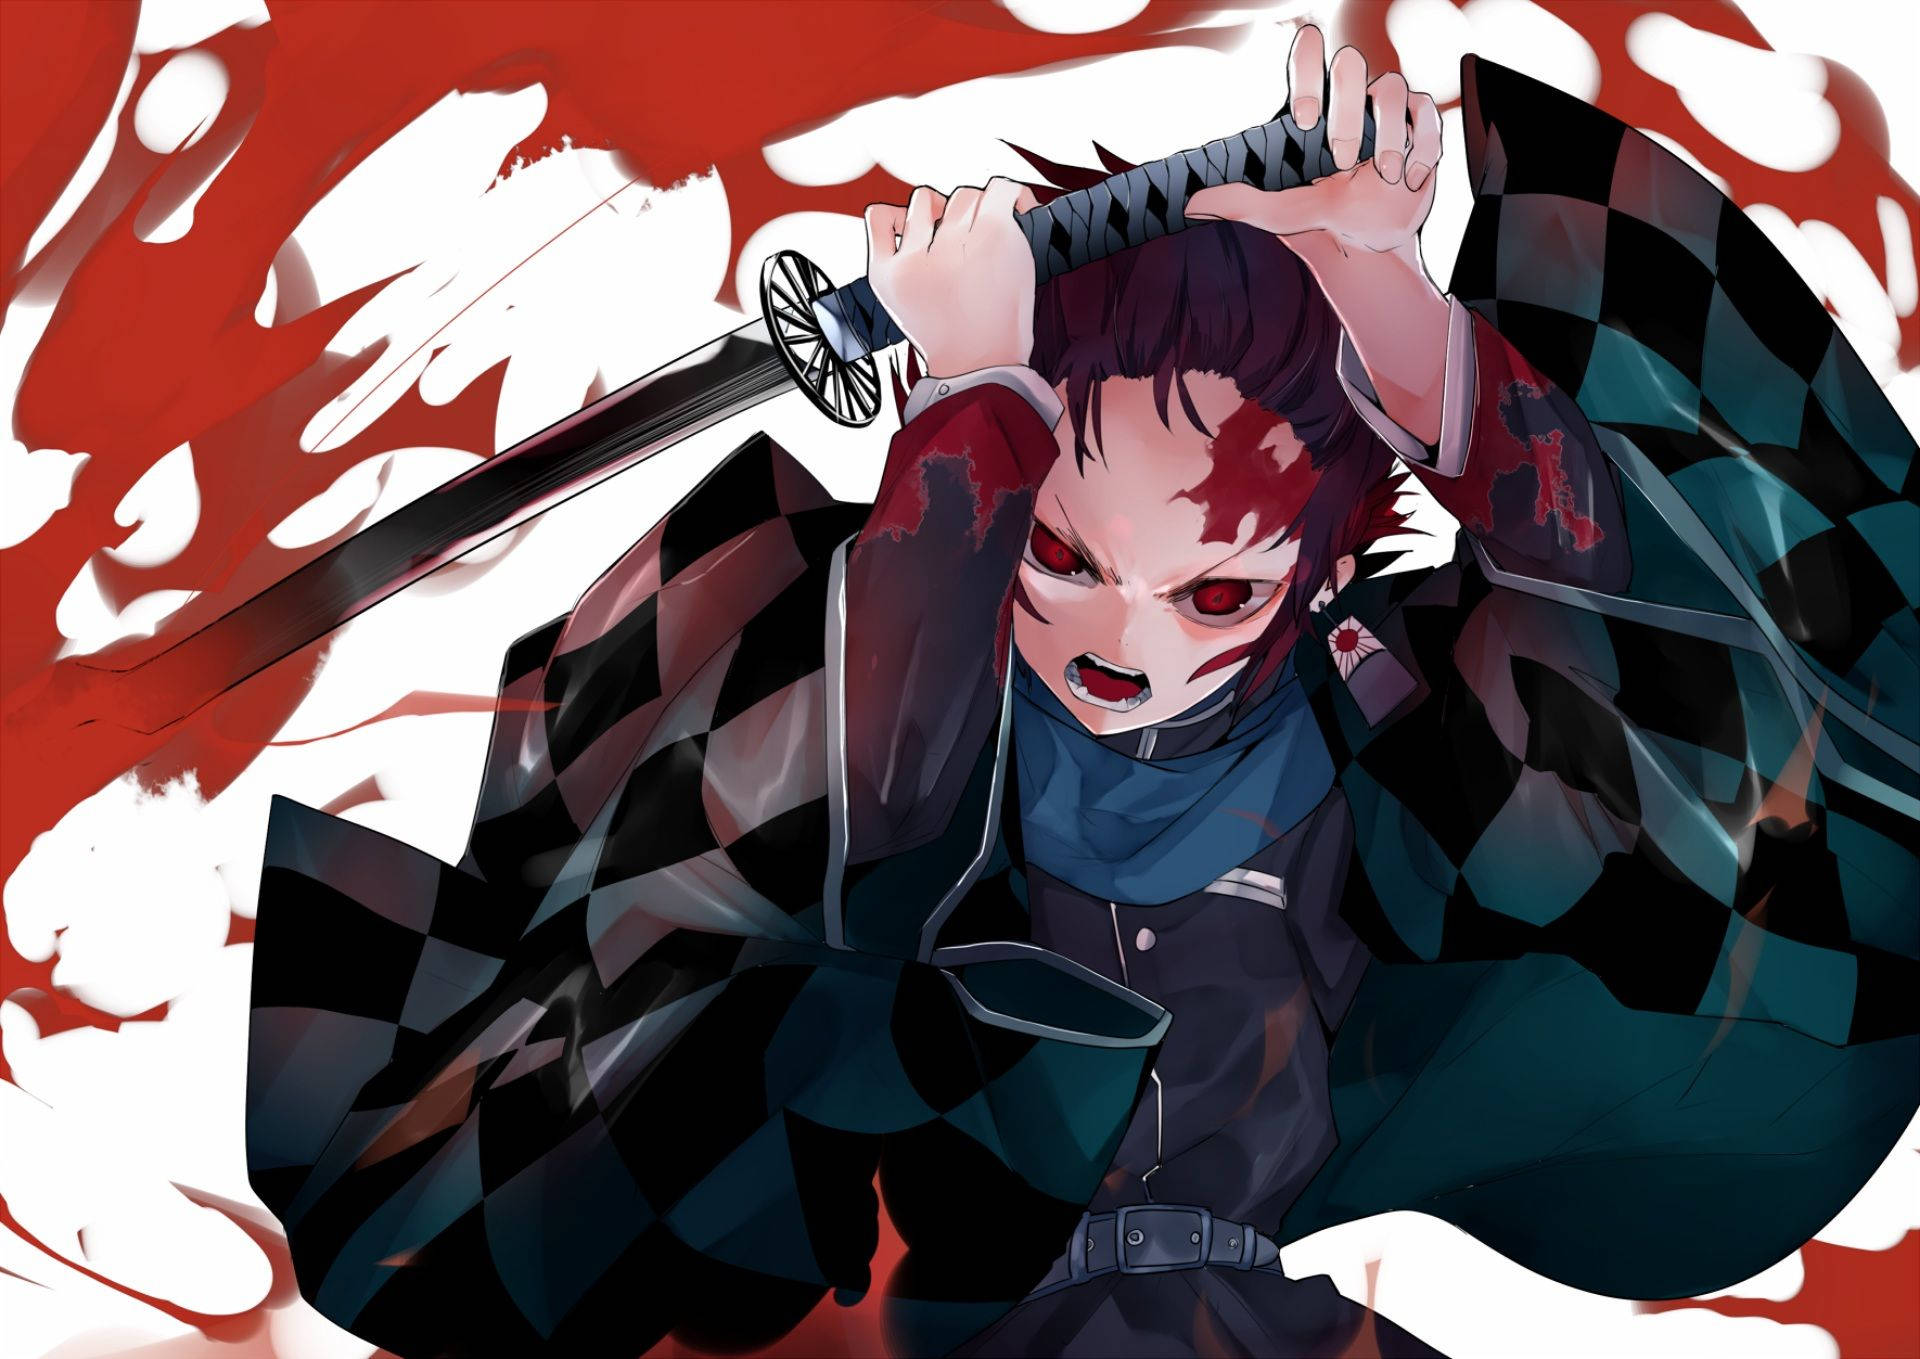 Tanjiro Kamado defends against an attack as a Demon Slayer Wallpaper